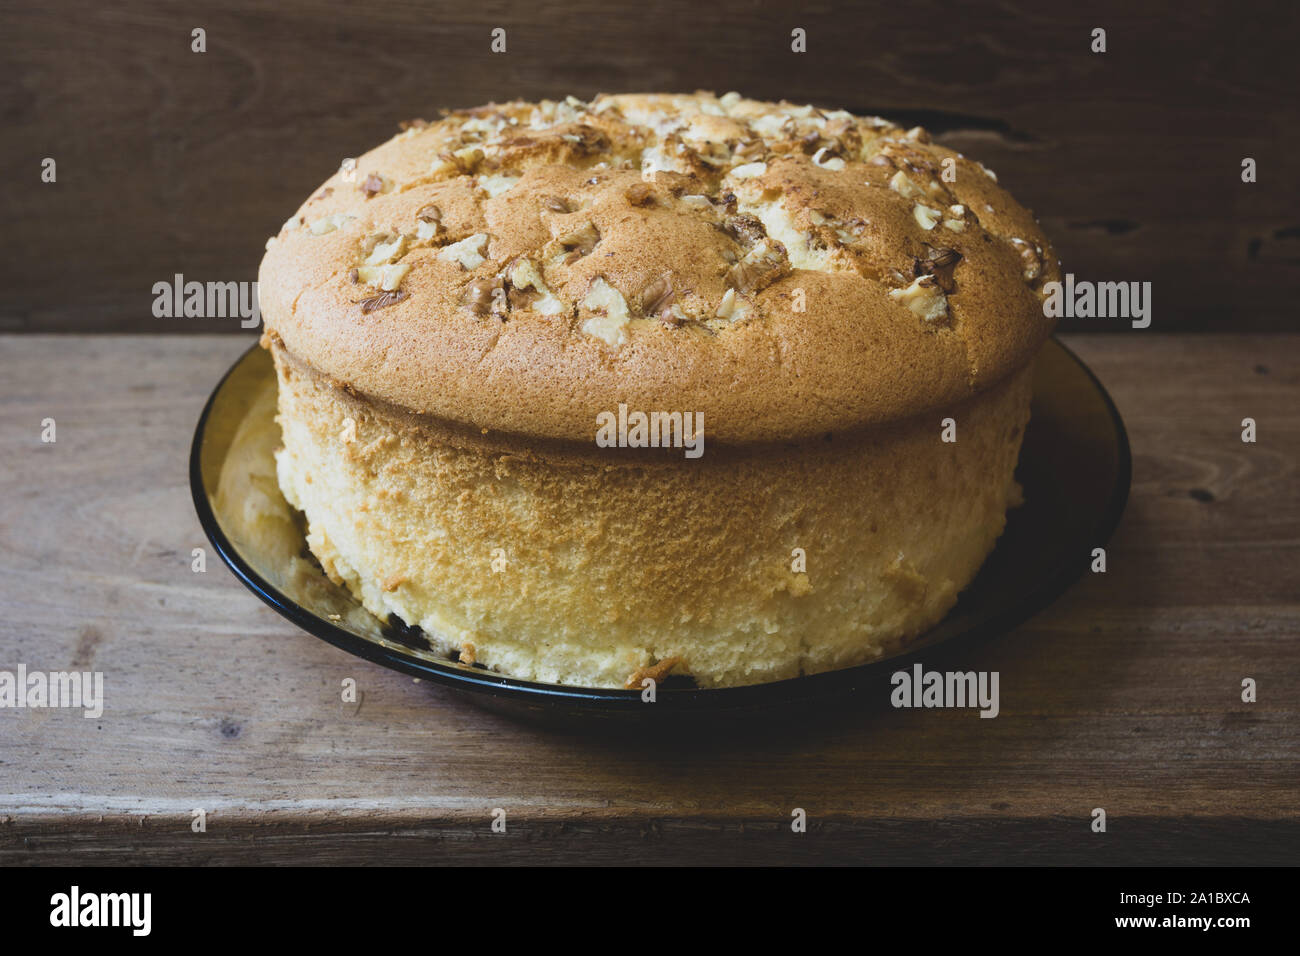 Cotton sponge cake with walnuts on top and raisins (dried black grapes) at the bottom, ready to eat, on rustic wooden table, homemade. Vintage toned Stock Photo